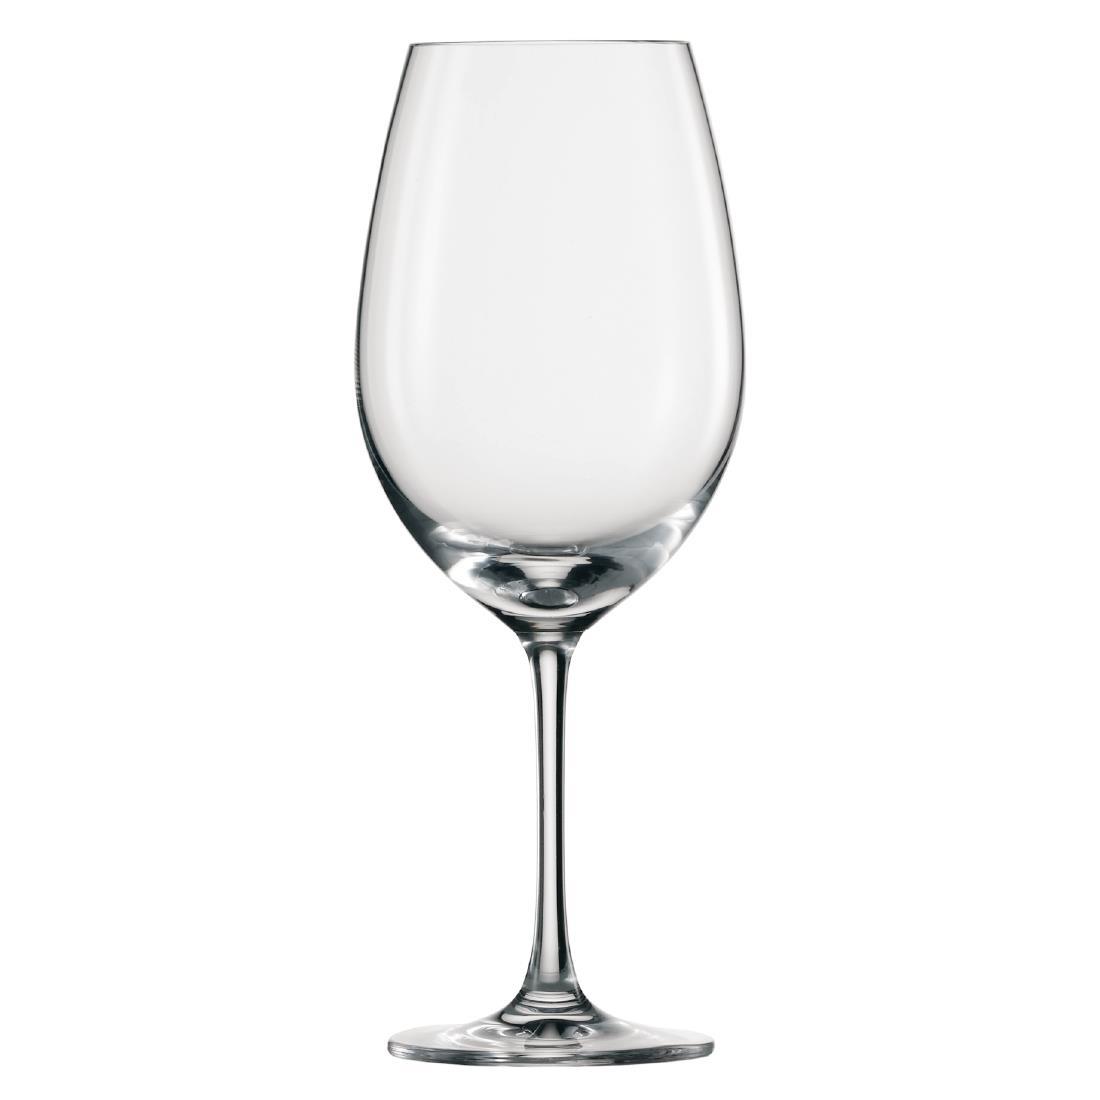 Schott Zwiesel Ivento Red Wine Glasses 480ml (Pack of 6) - GL135  - 1